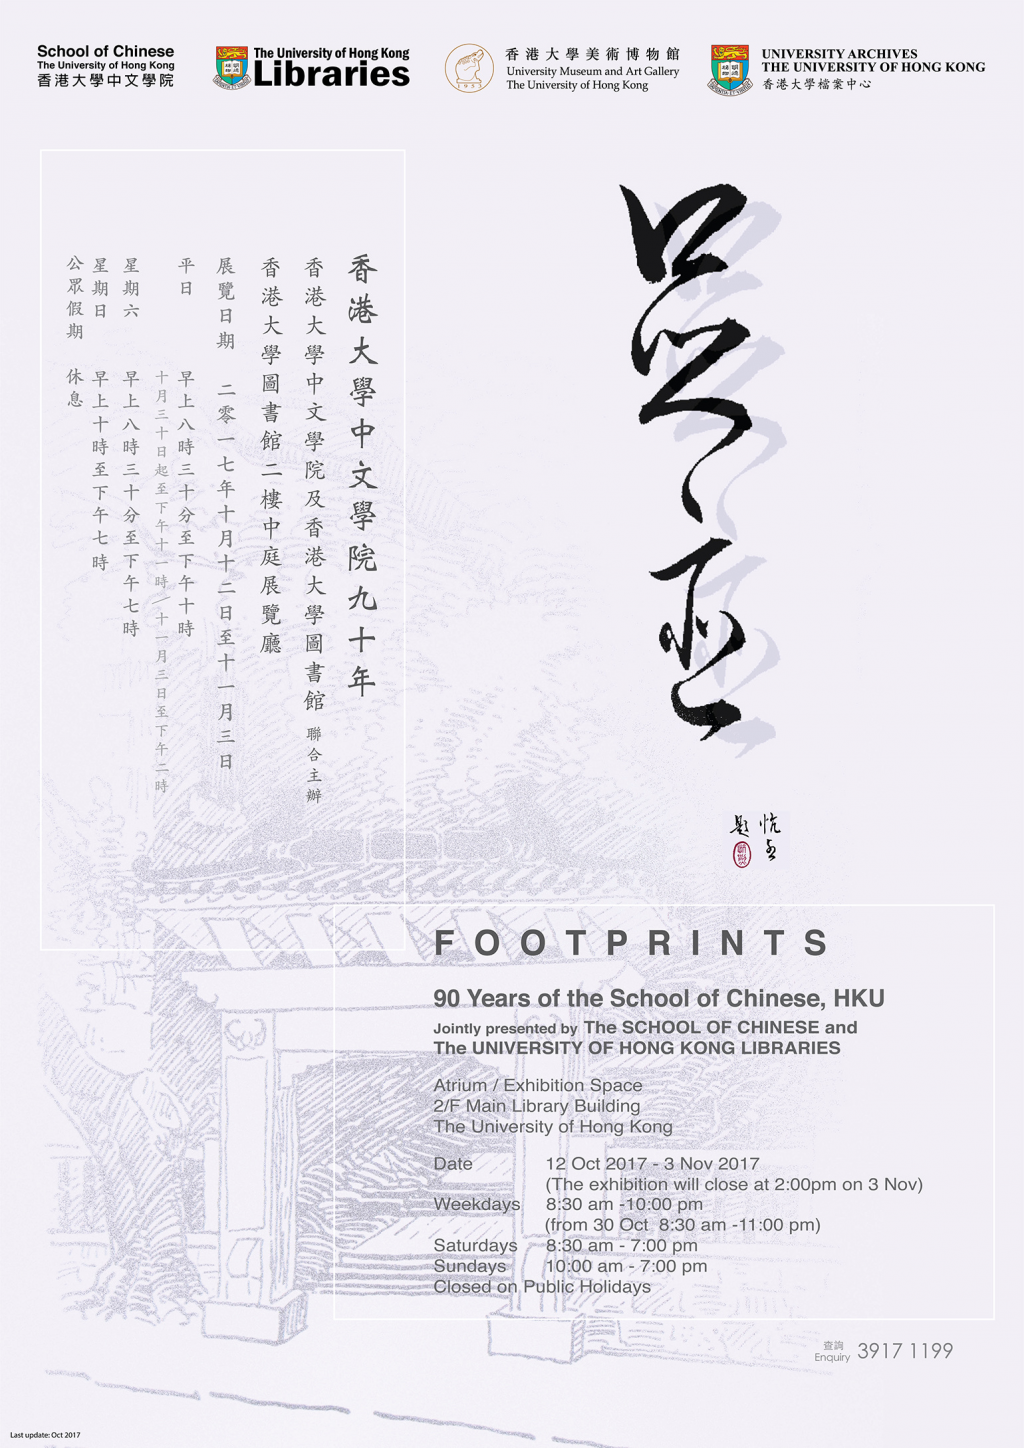 Footprints: 90 Years of the School of Chinese, HKU